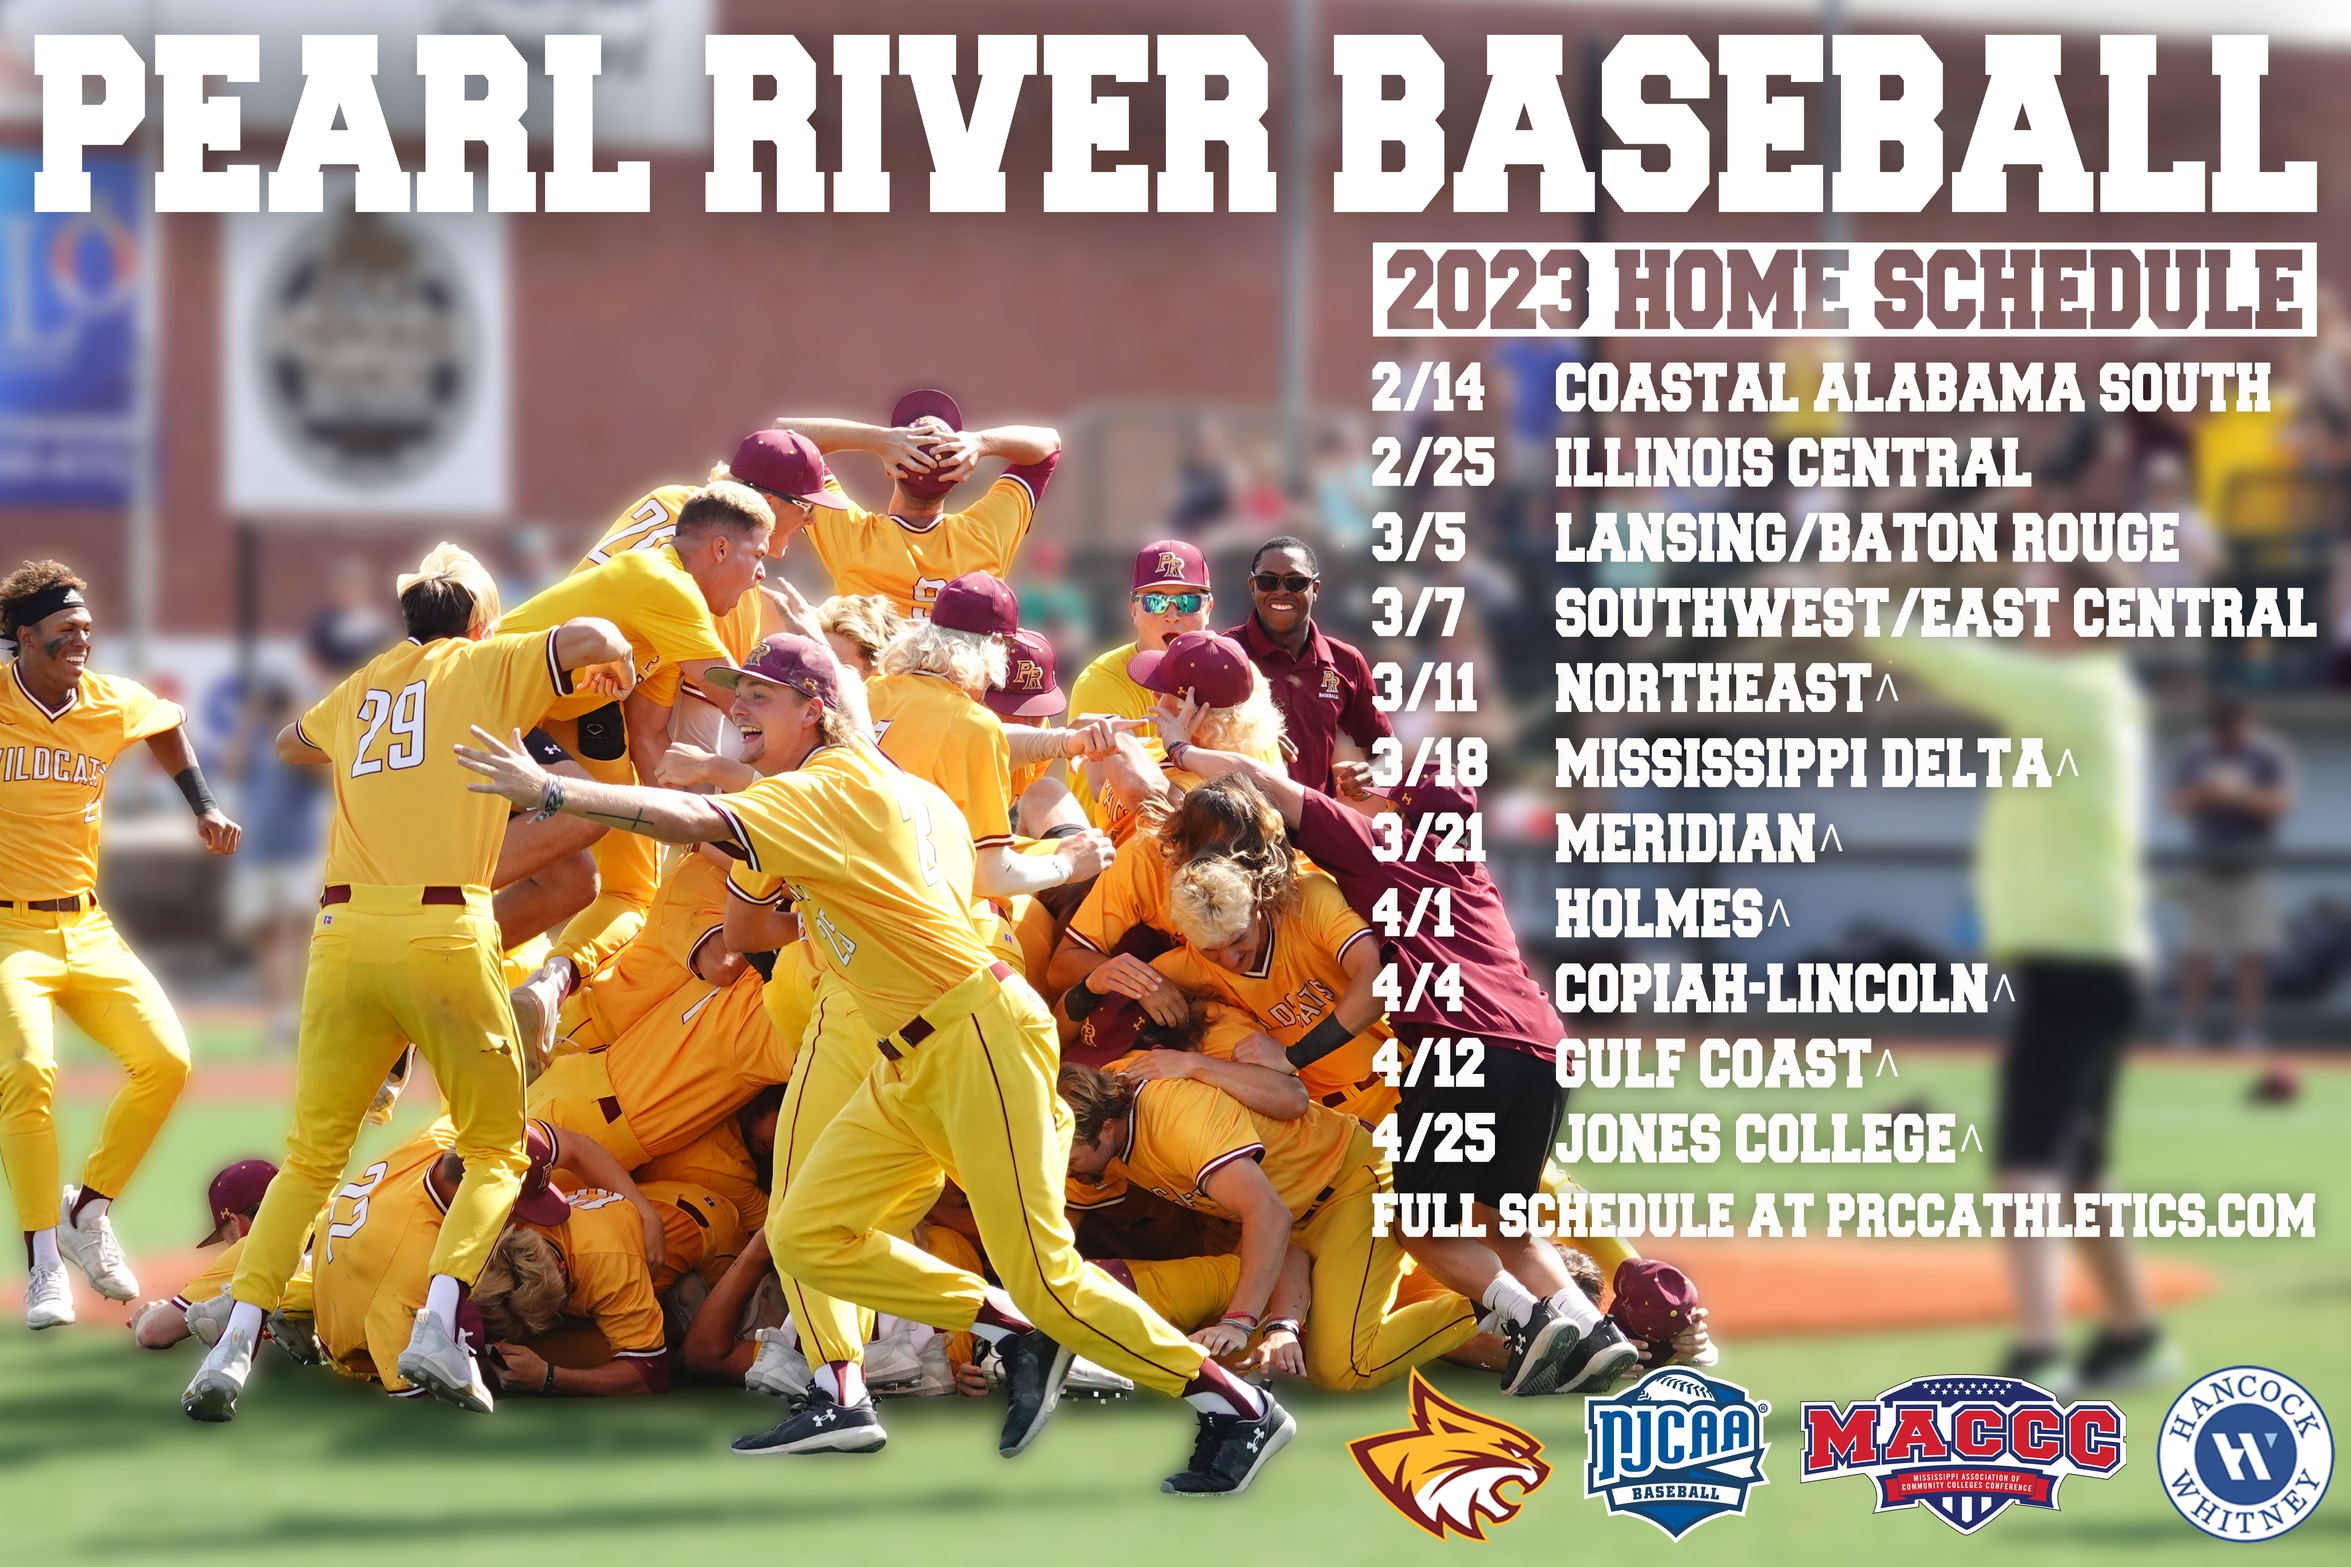 Defending National Champion Pearl River baseball releases 2023 schedule 